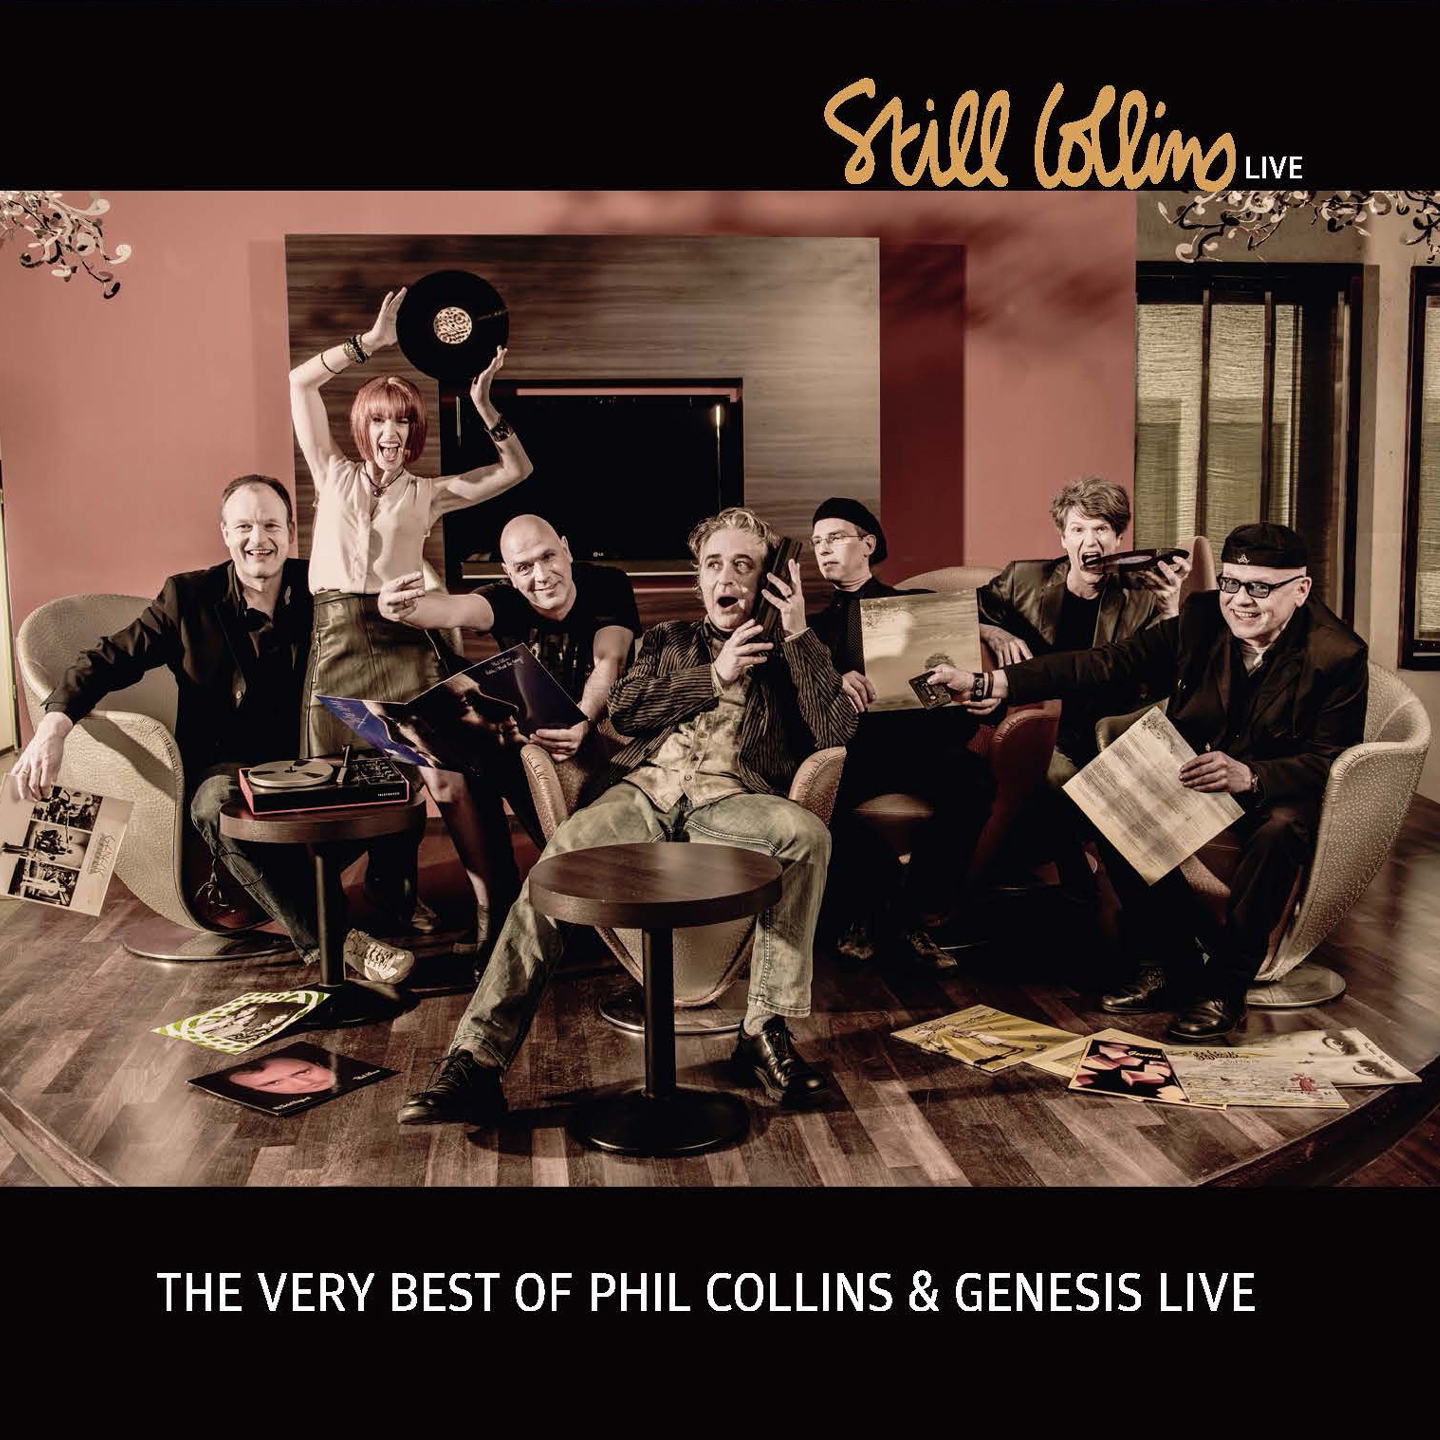 The very Best of Phil Collins & Genesis Live (A tribute concert event)